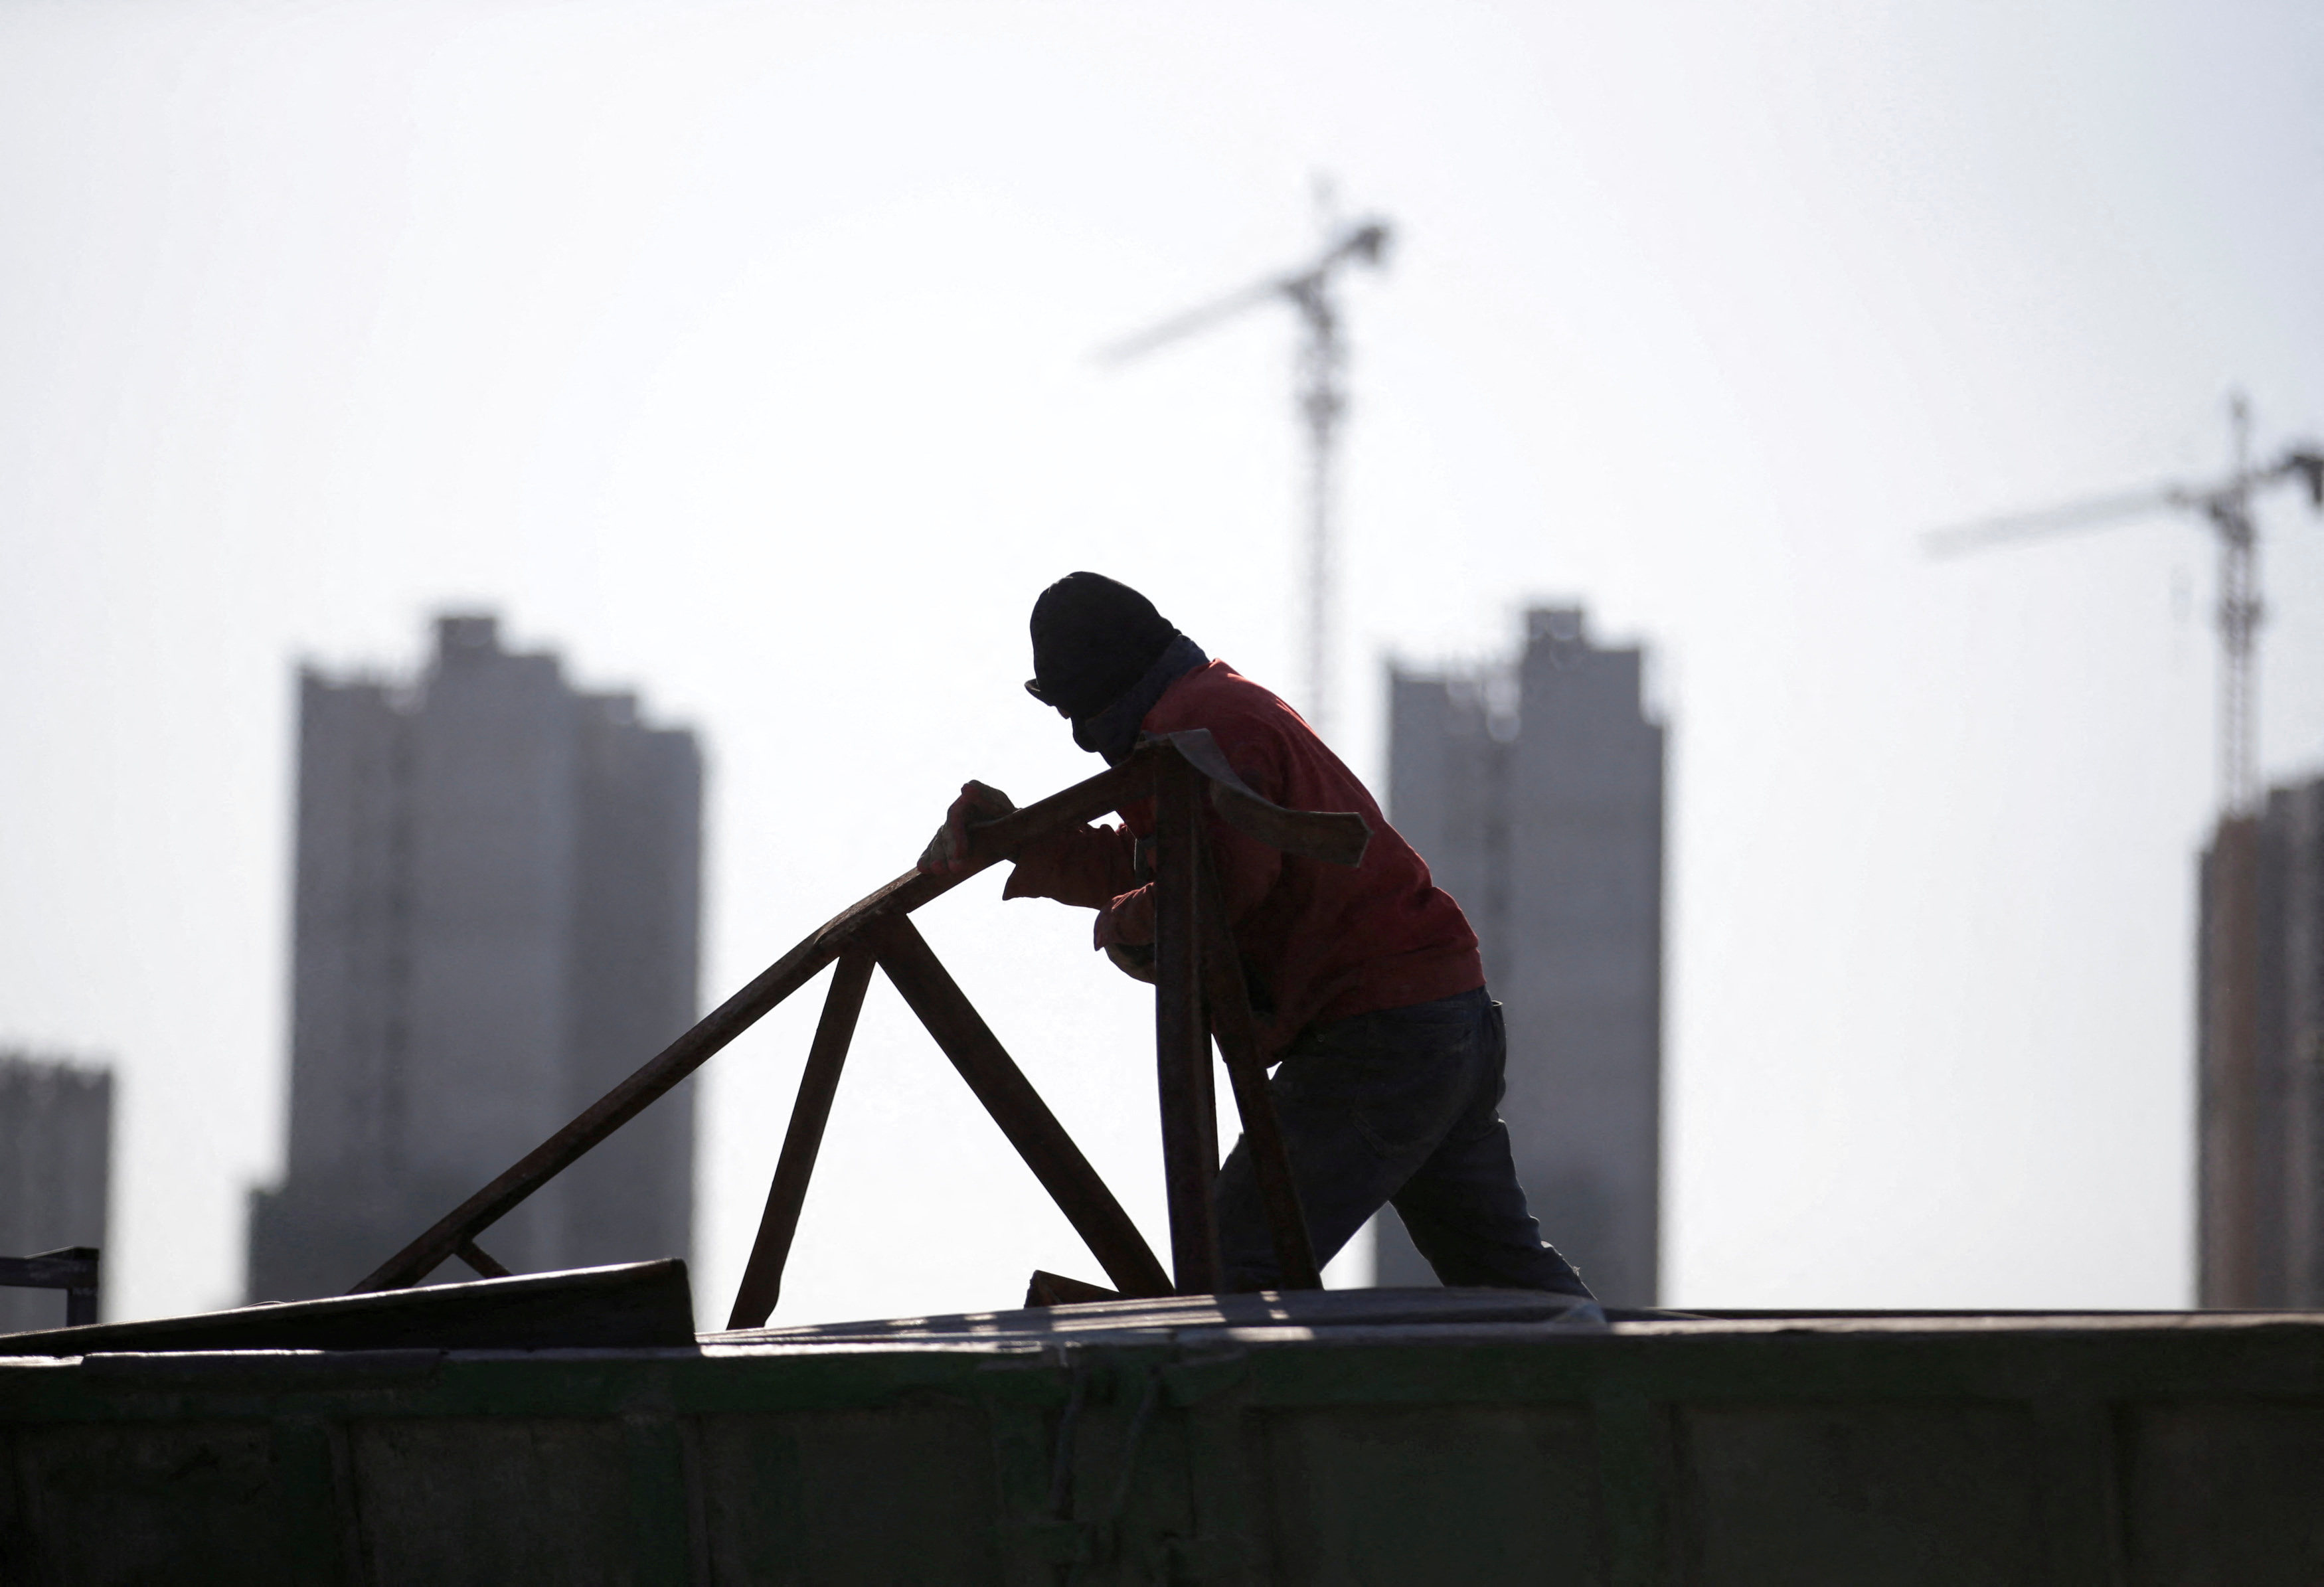 About 20 million homes have been sold but not built in China. Photo: Reuters